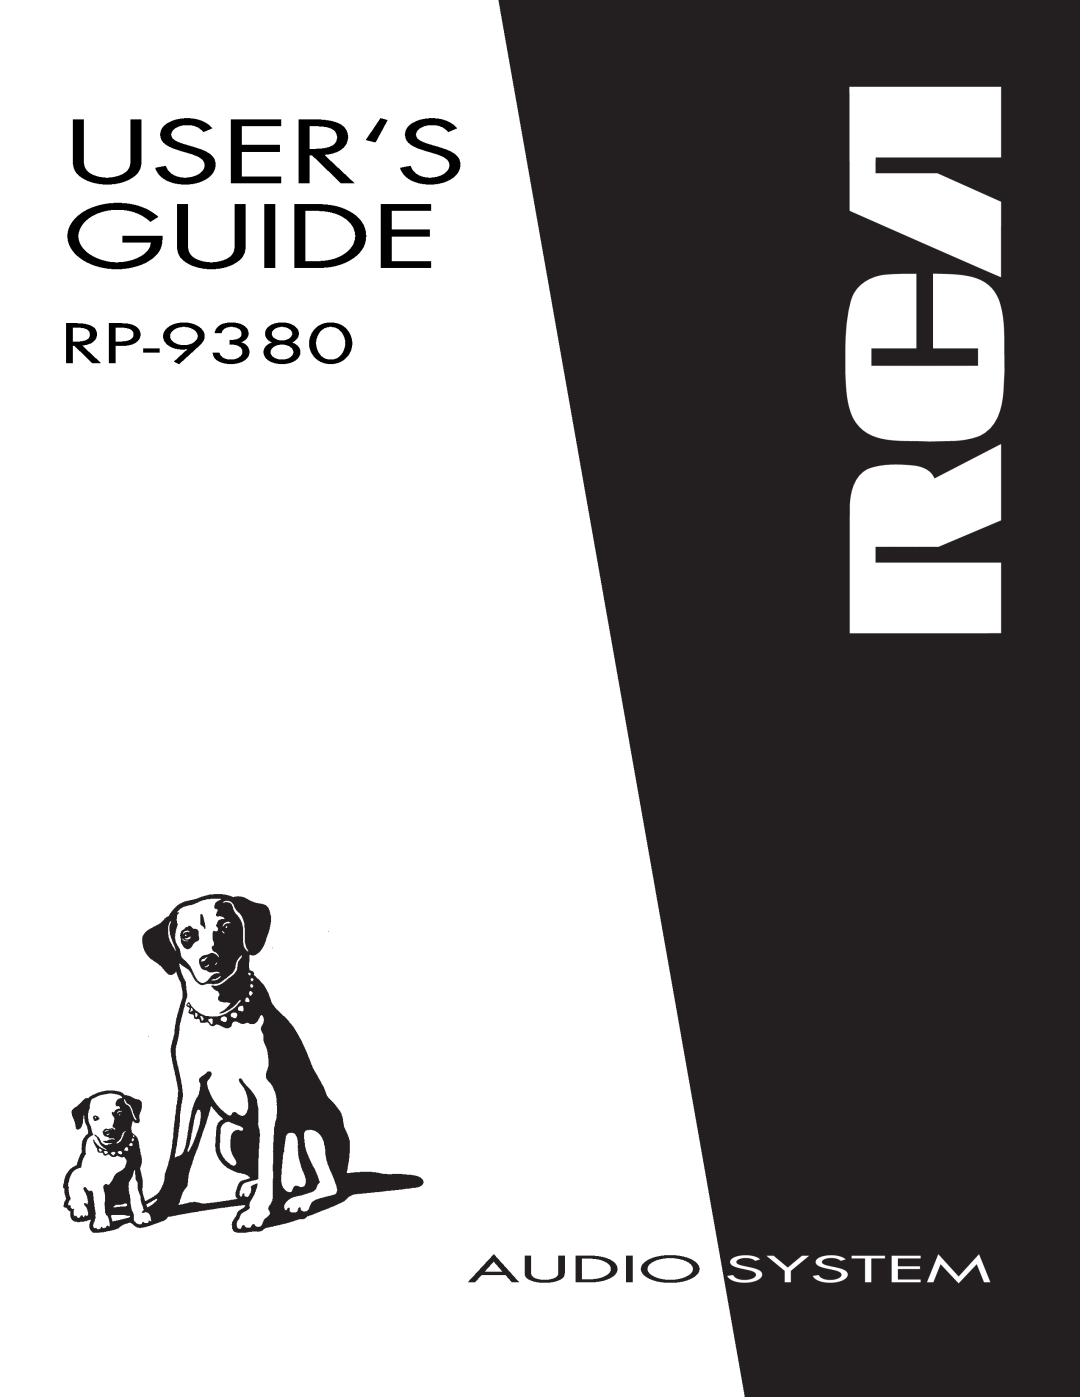 RCA RP-9380 manual User‘S Guide, Audio 